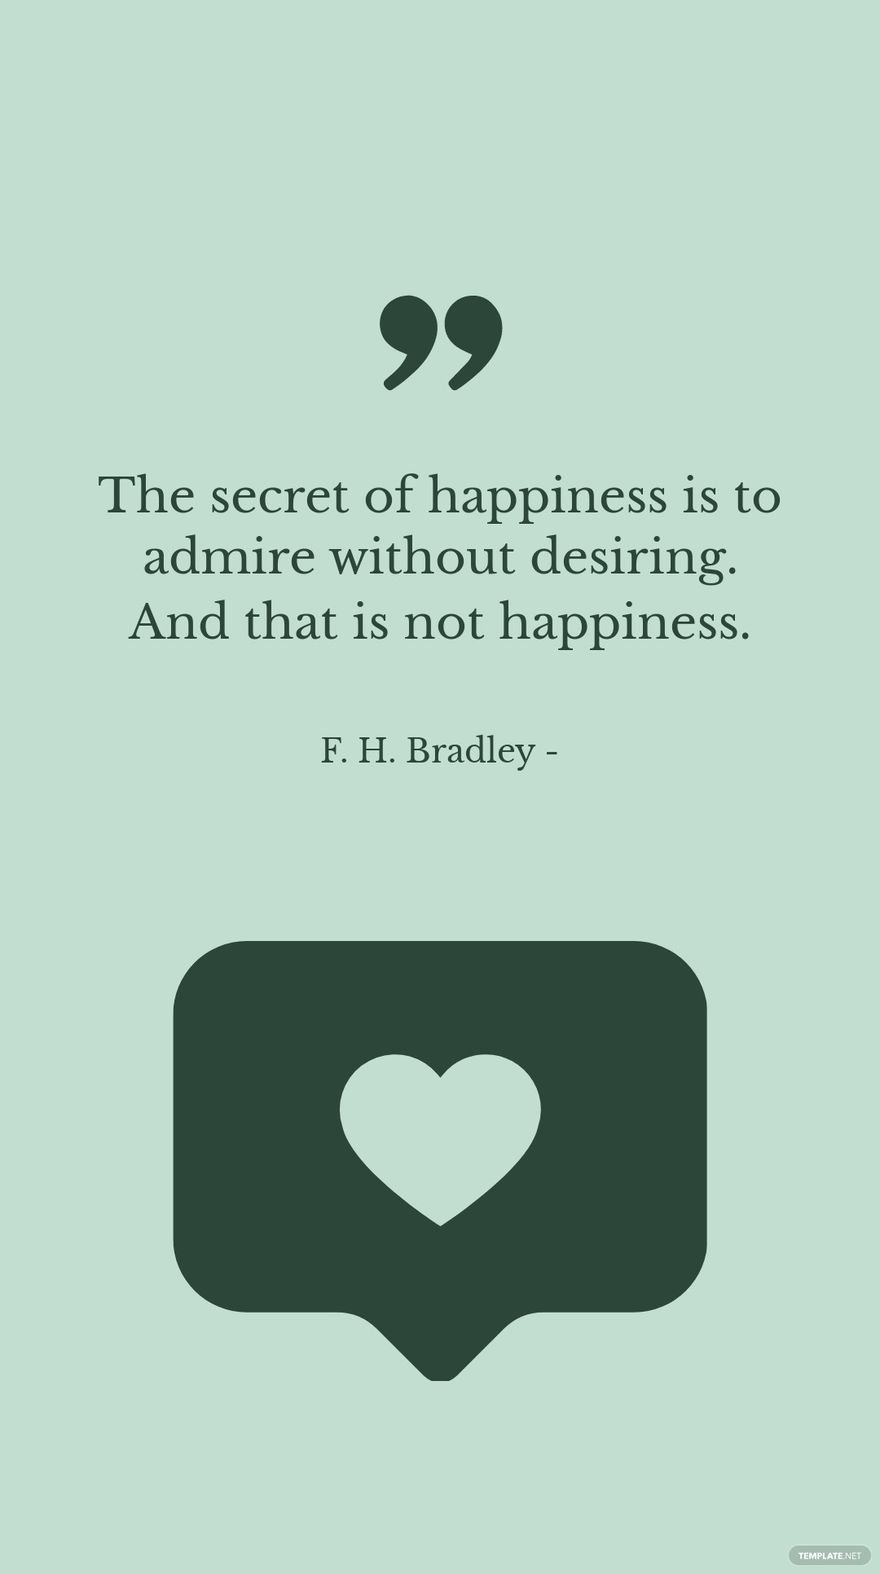 F. H. Bradley - The secret of happiness is to admire without desiring. And that is not happiness.